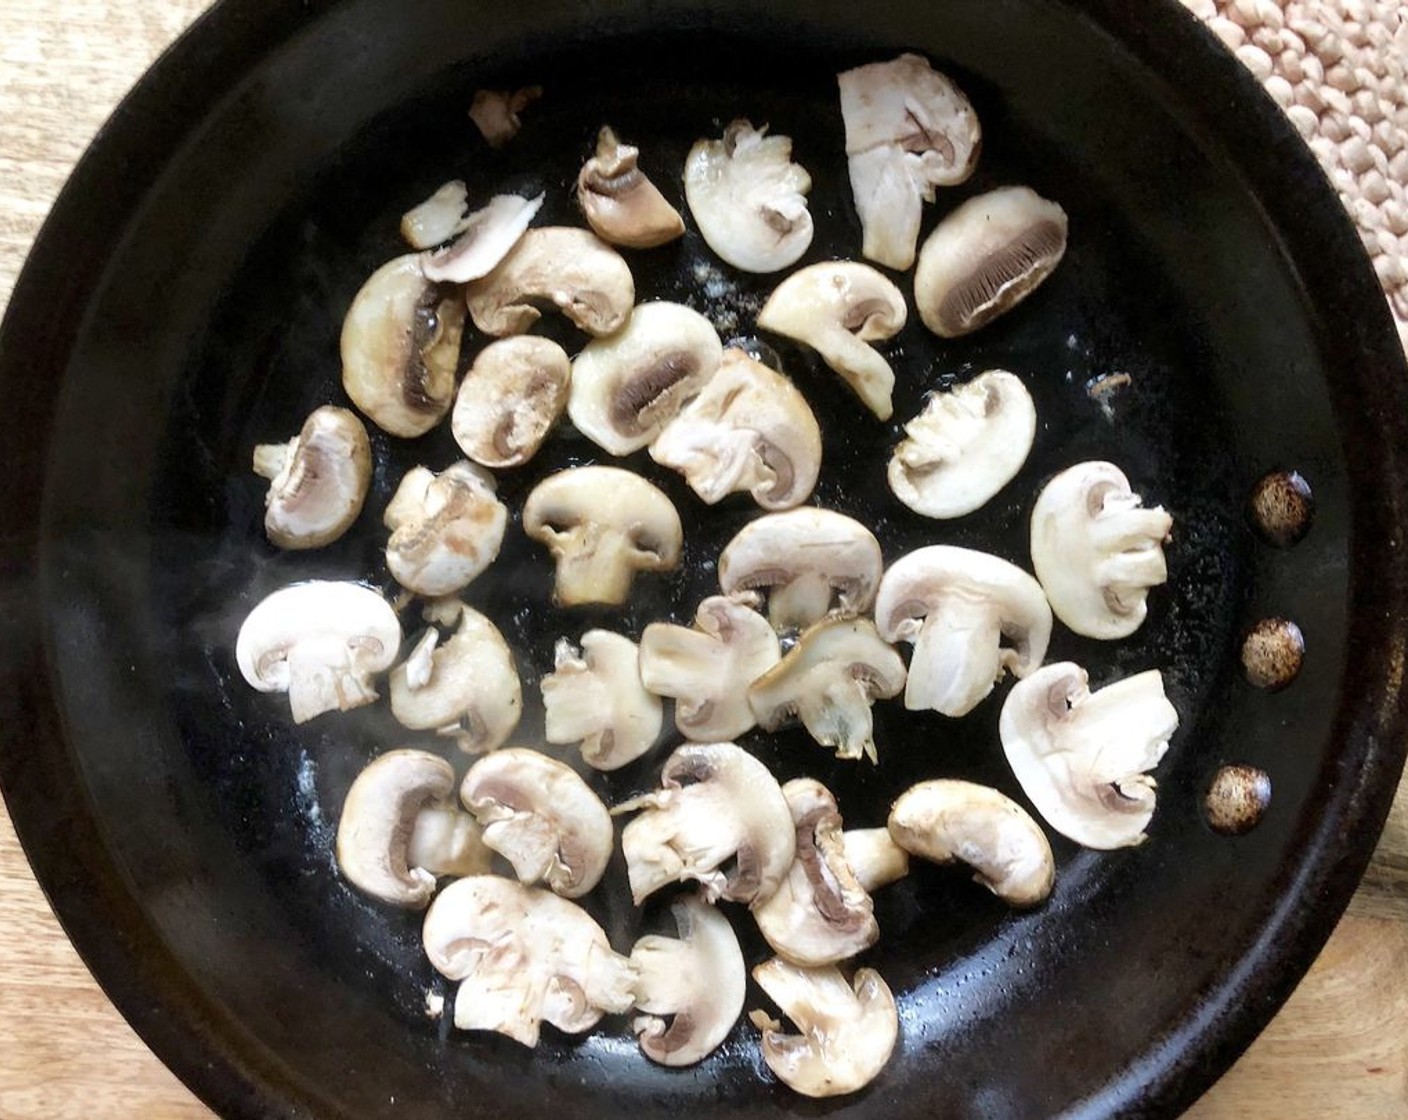 step 5 Meanwhile, sauté the cup of Button Mushroom (1 cup) in the remaining Unsalted Butter (1 Tbsp) until they are cooked through with crispy edges. If you like, season them with a bit of salt and pepper. Set aside to use as a garnish.